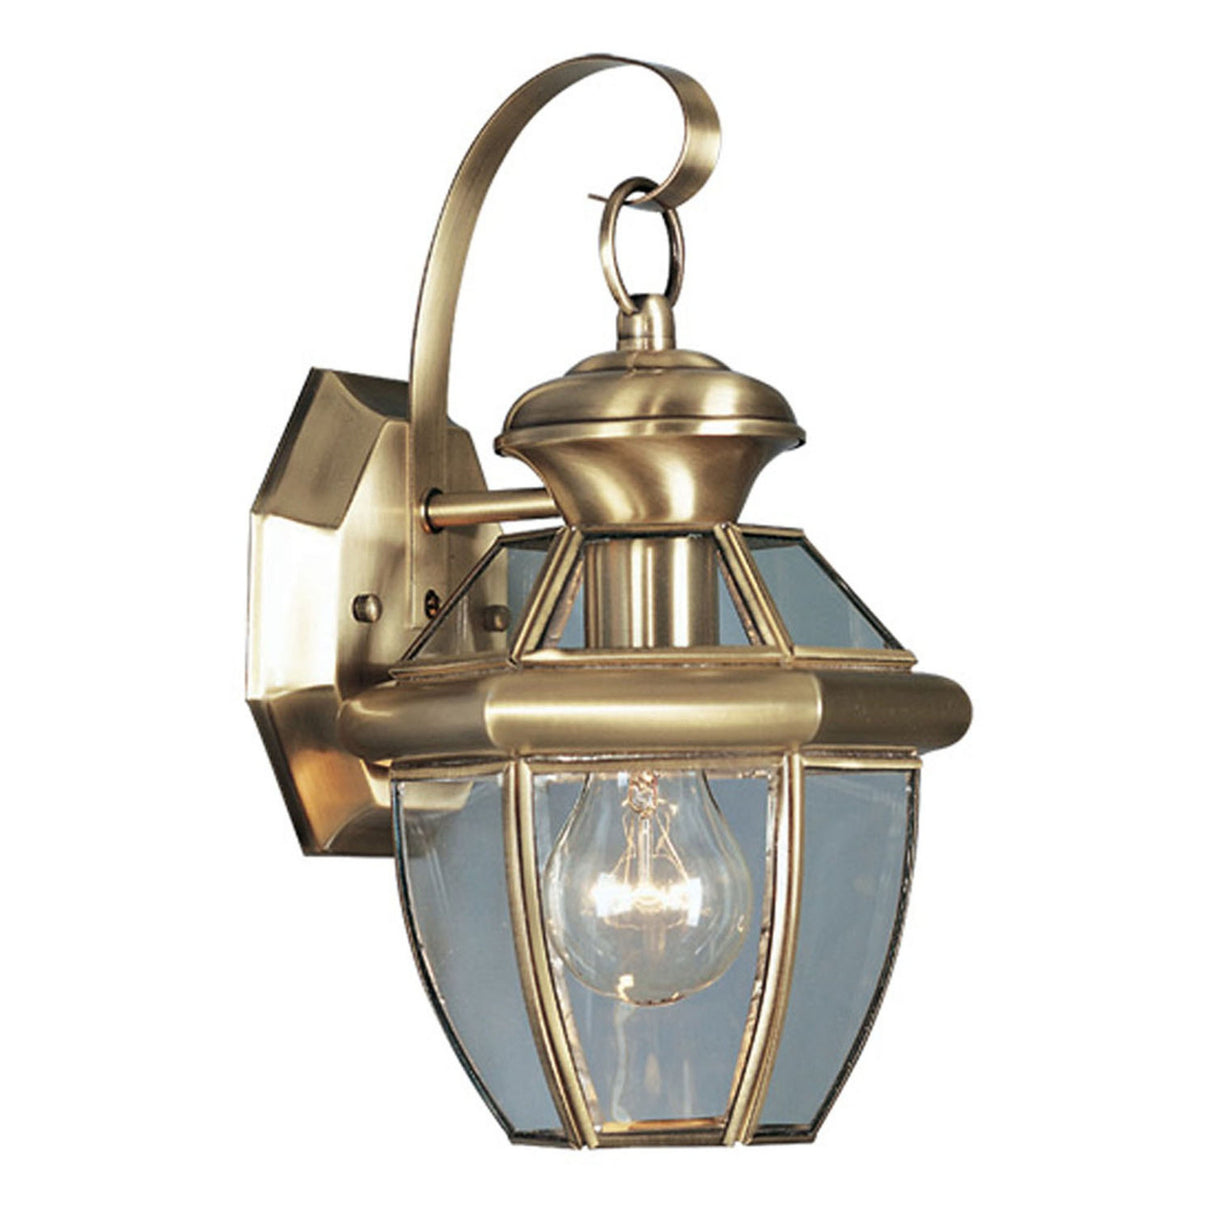 Livex Lighting 2051-01 Monterey 1 Light Outdoor Antique Brass Finish Solid Brass Wall Lantern with Clear Beveled Glass